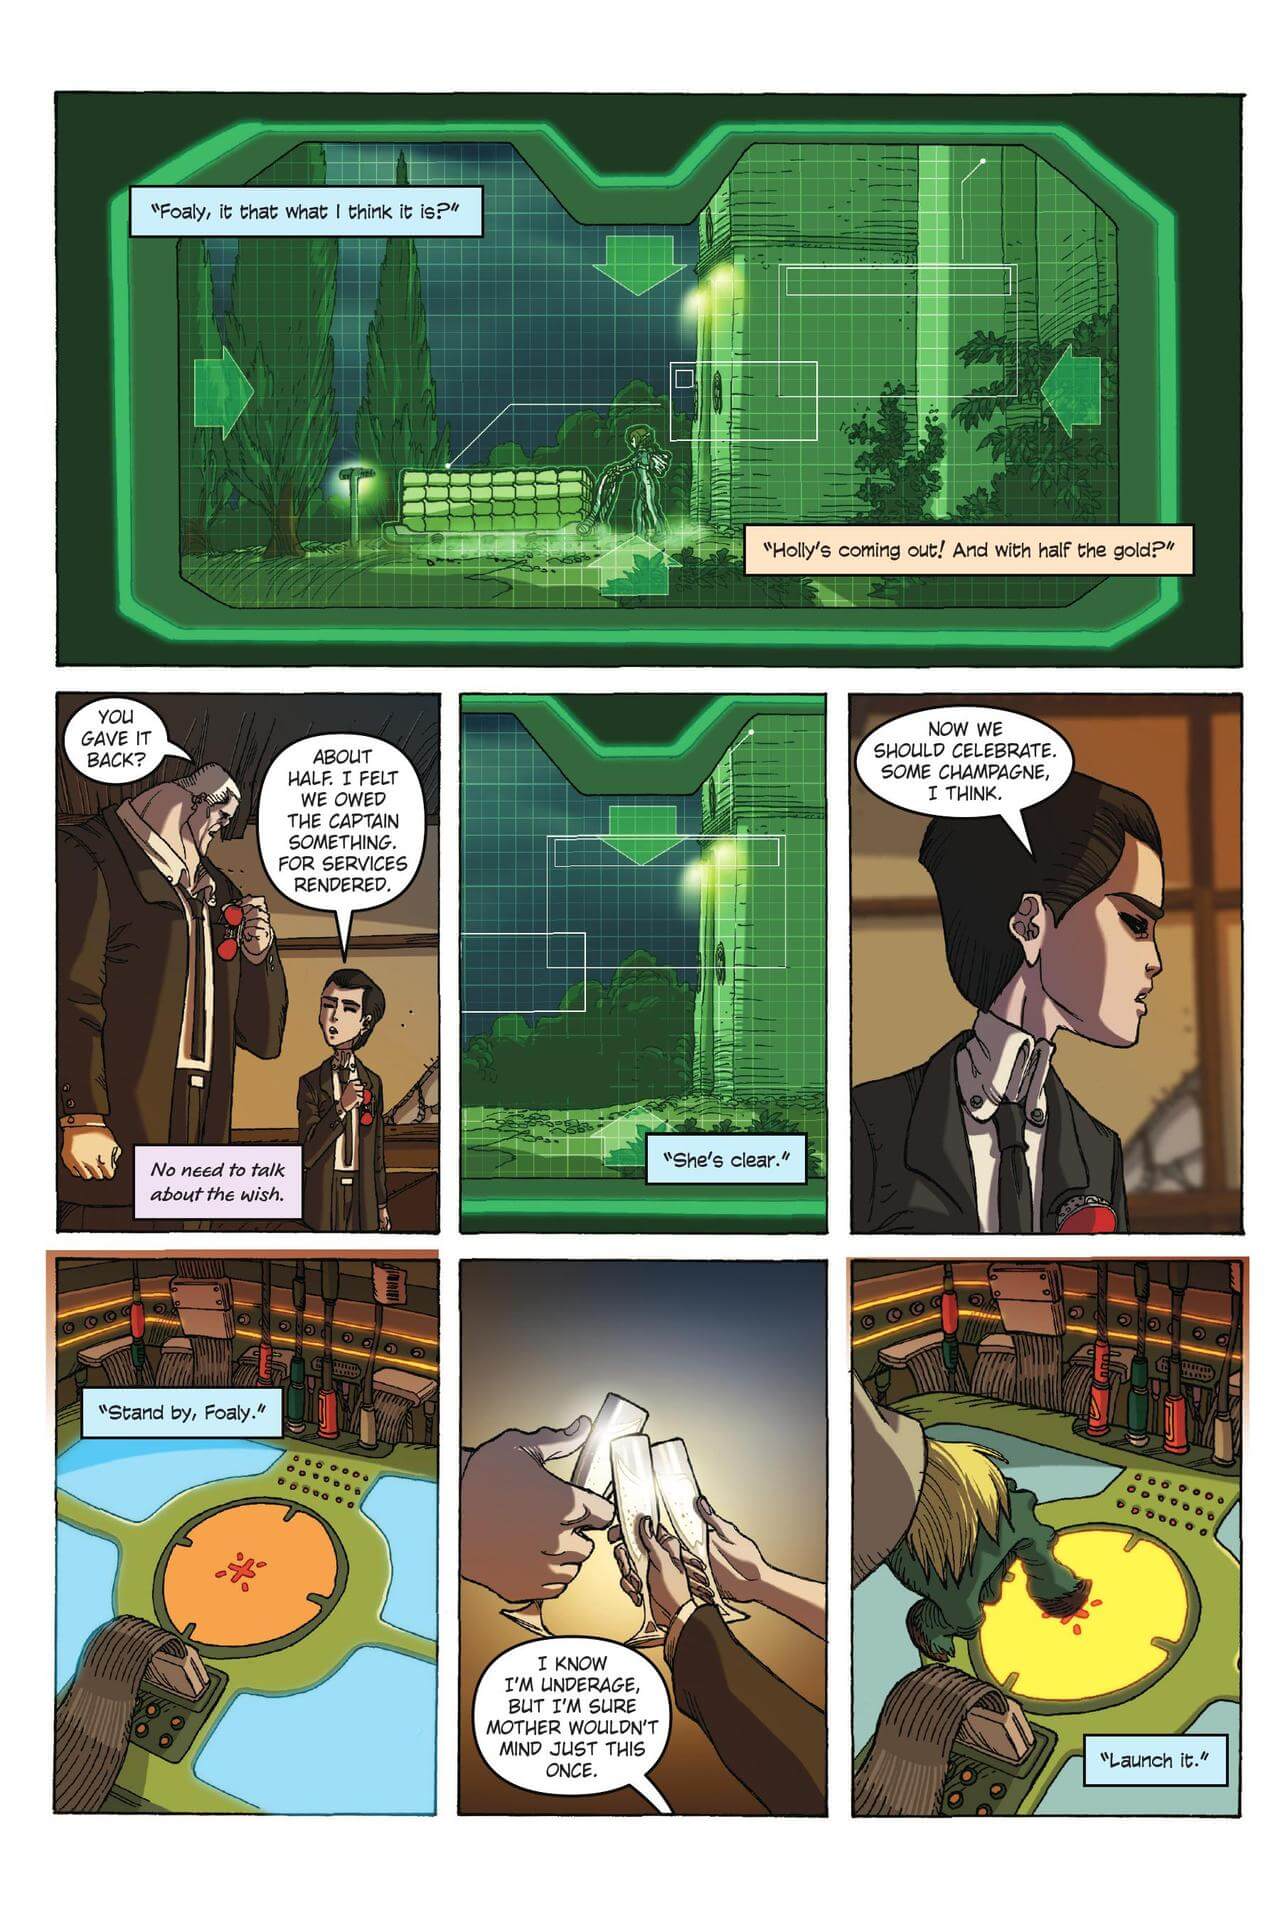 page 103 of artemis fowl the graphic novel